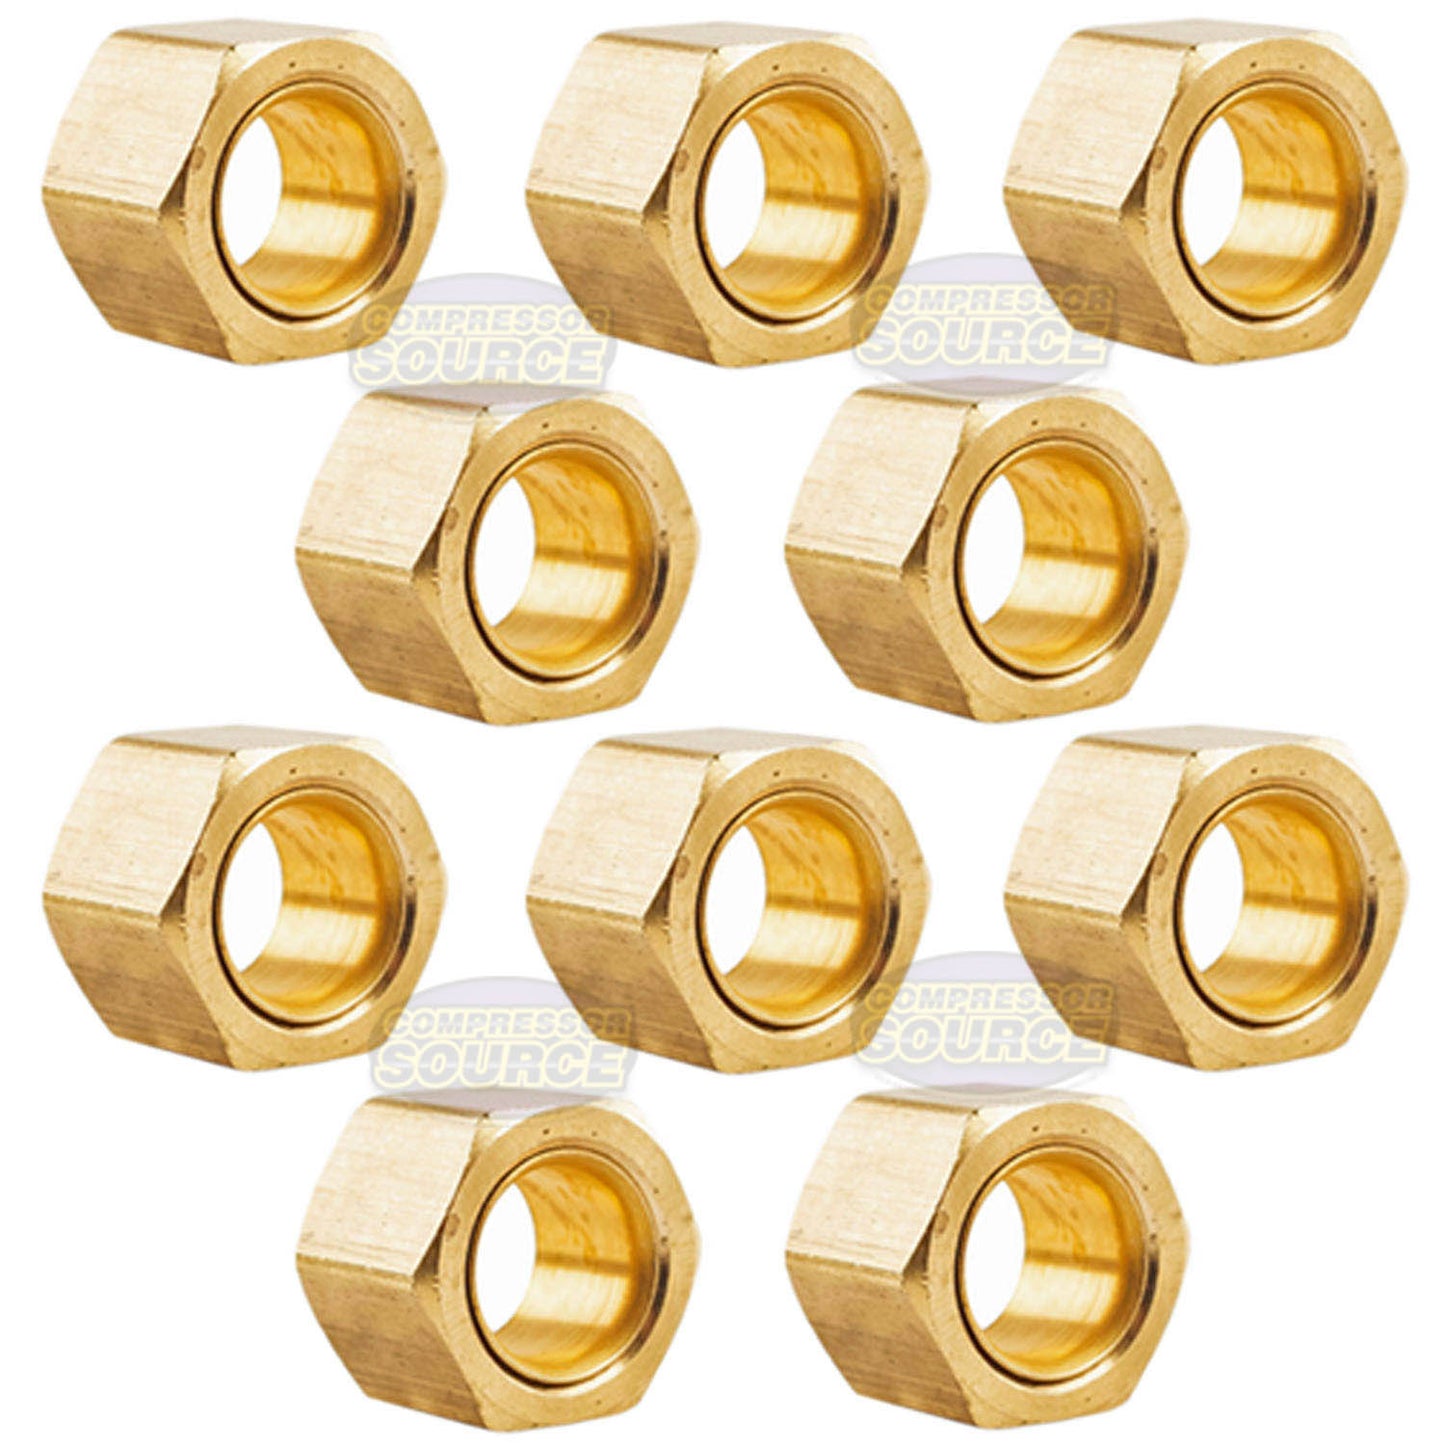 10 Pack 3/8" Compression Nut & Ferrule Combo for 3/8" OD Tube Brass Sleeve Nut